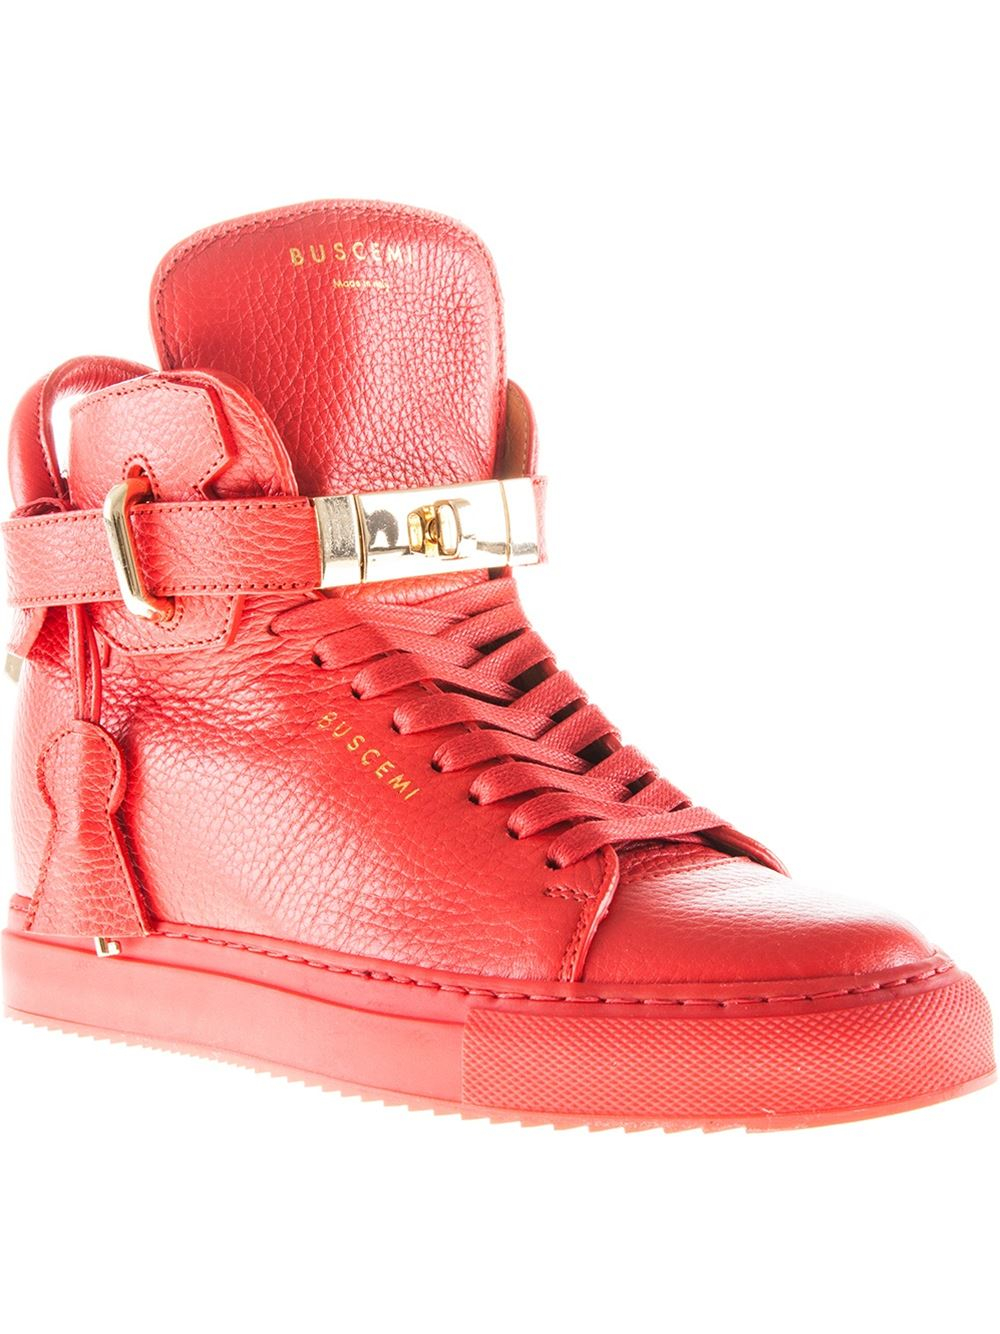 Buscemi 100mm High-Top Sneakers in Red | Lyst